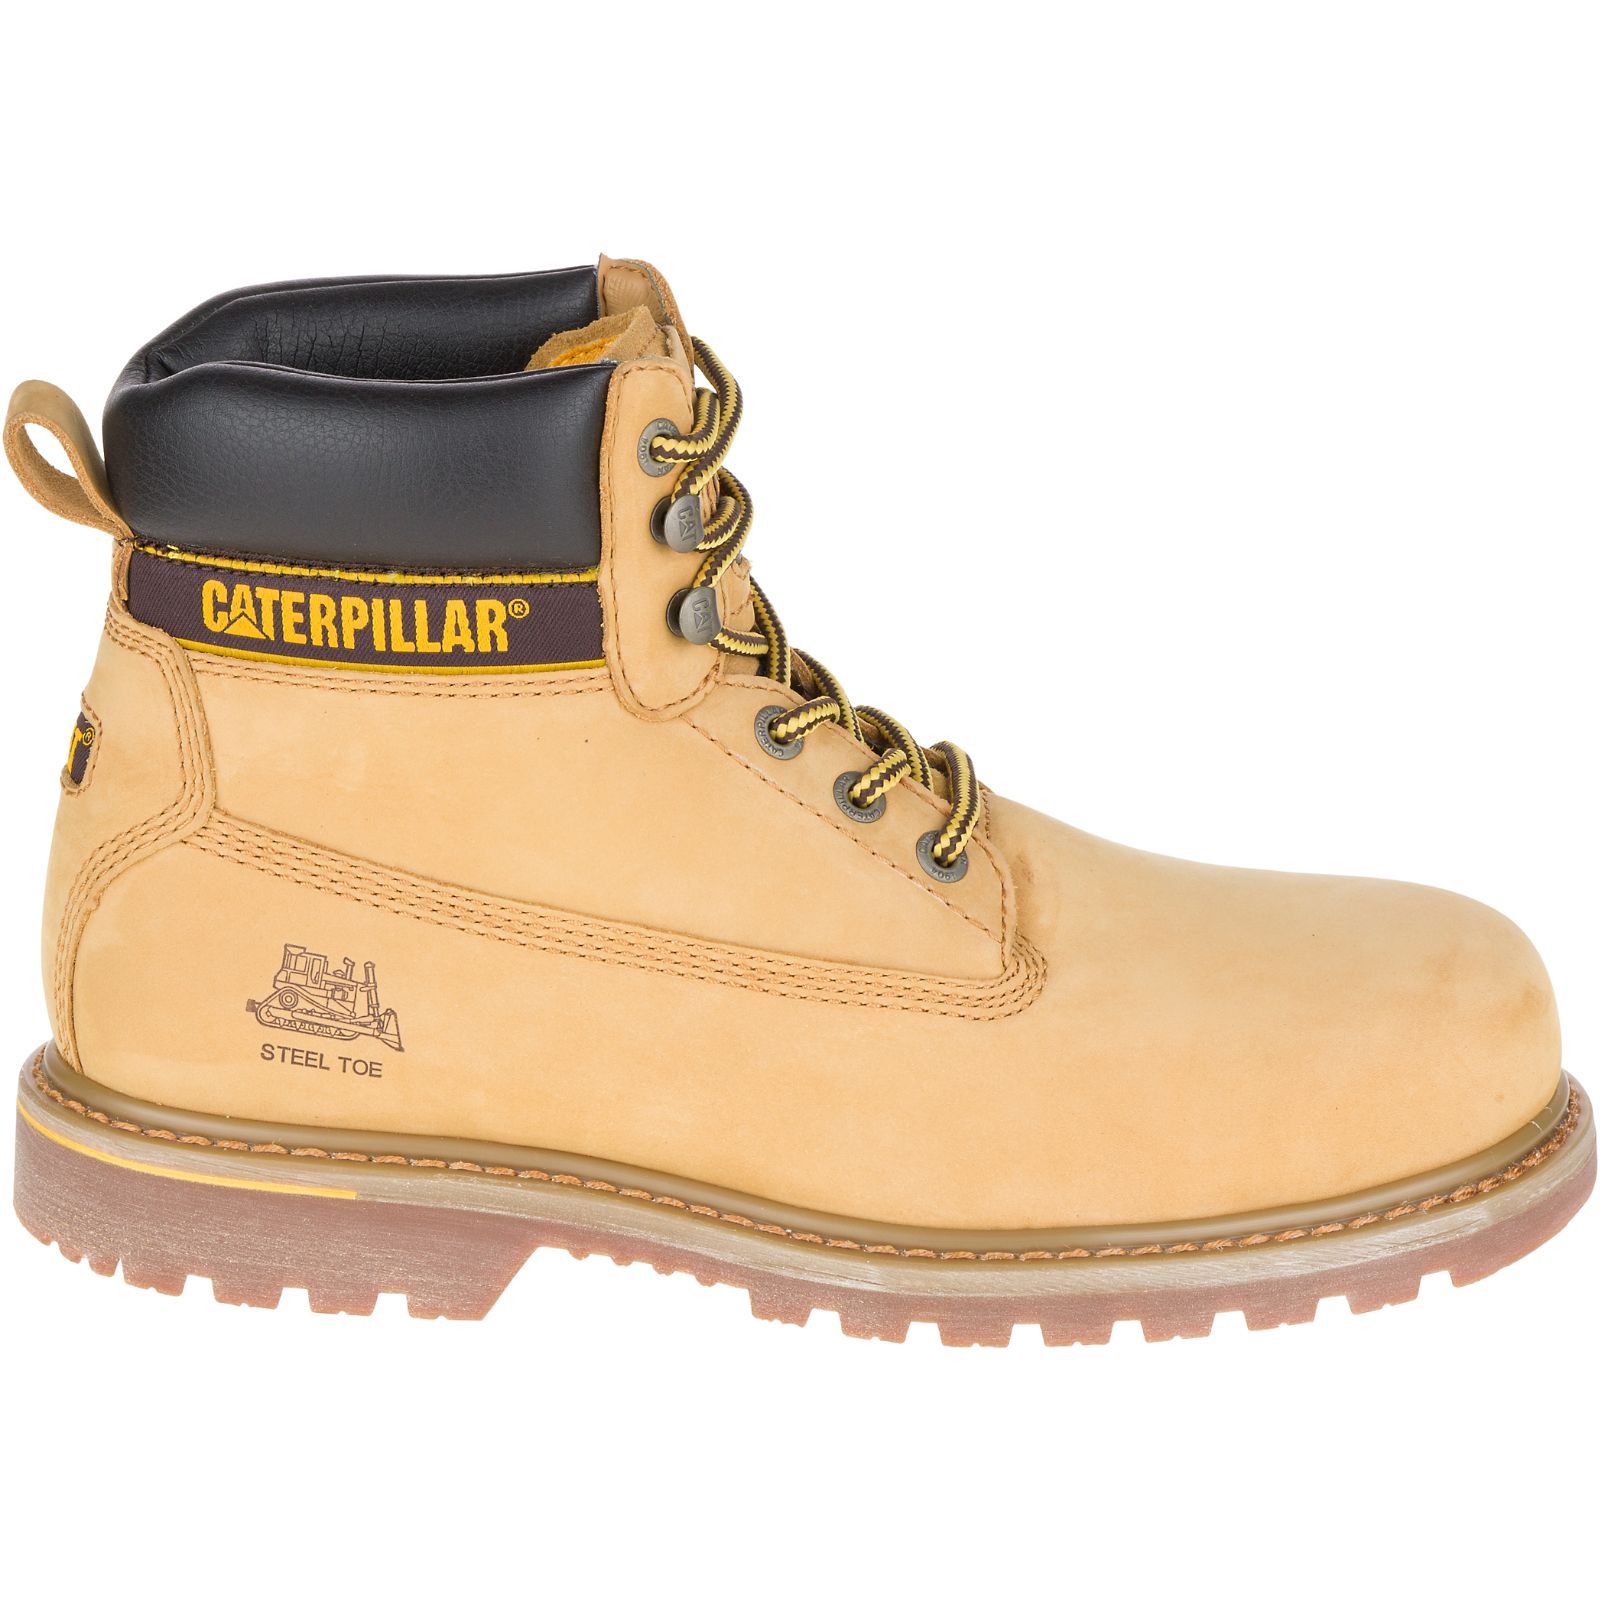 Mens Caterpillar Holton Steel Toe S3 Hro Src Work Boots Orange Malaysia Outlet (ZQPSM5832)